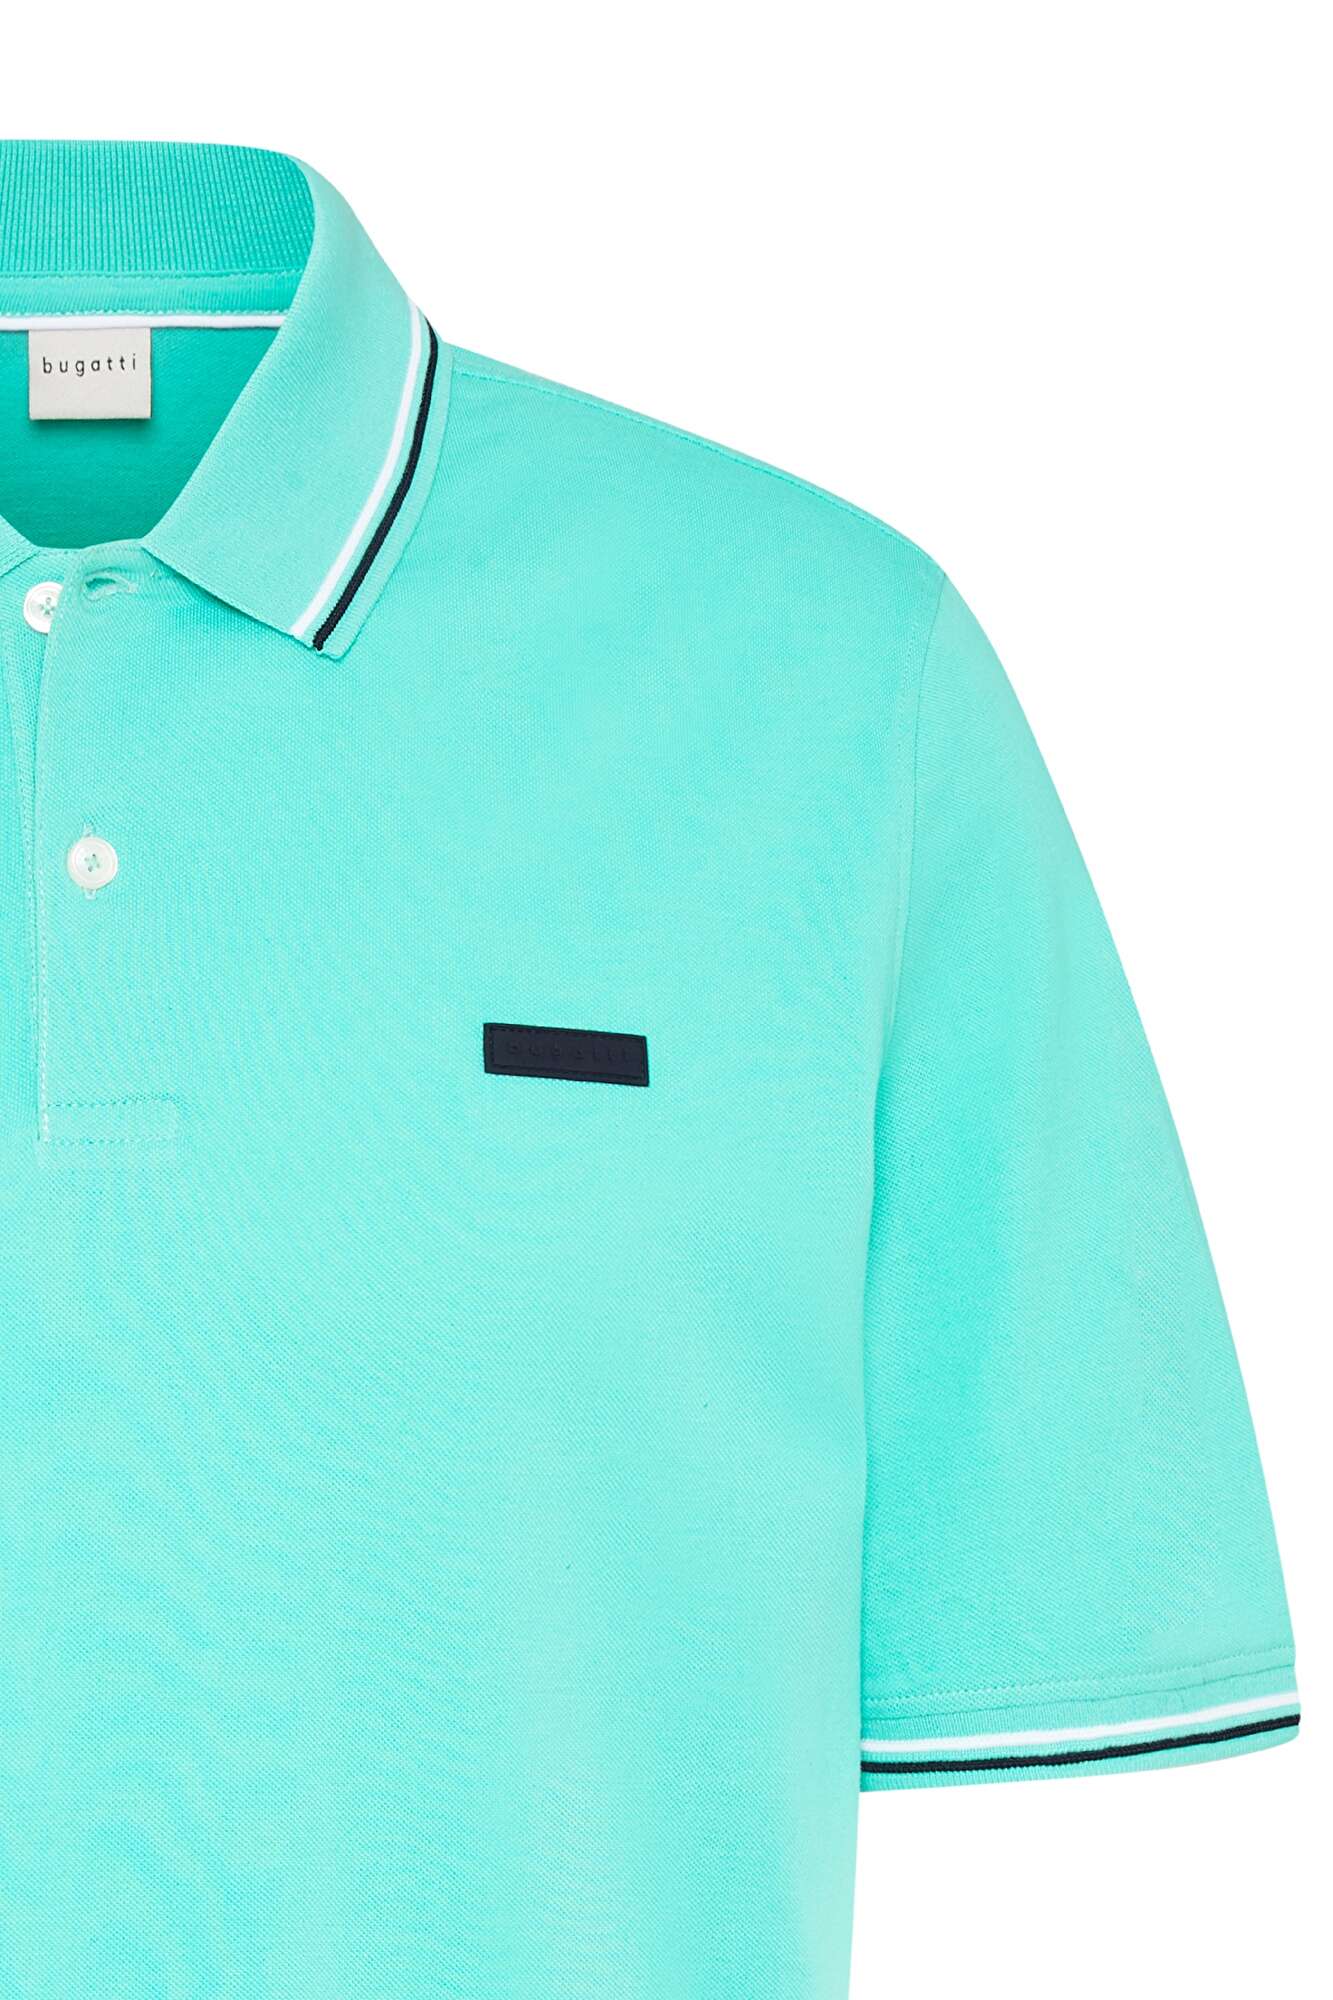 Pique polo contrasting collar bugatti with in and stripes | sleeve on mint cuffs the shirt